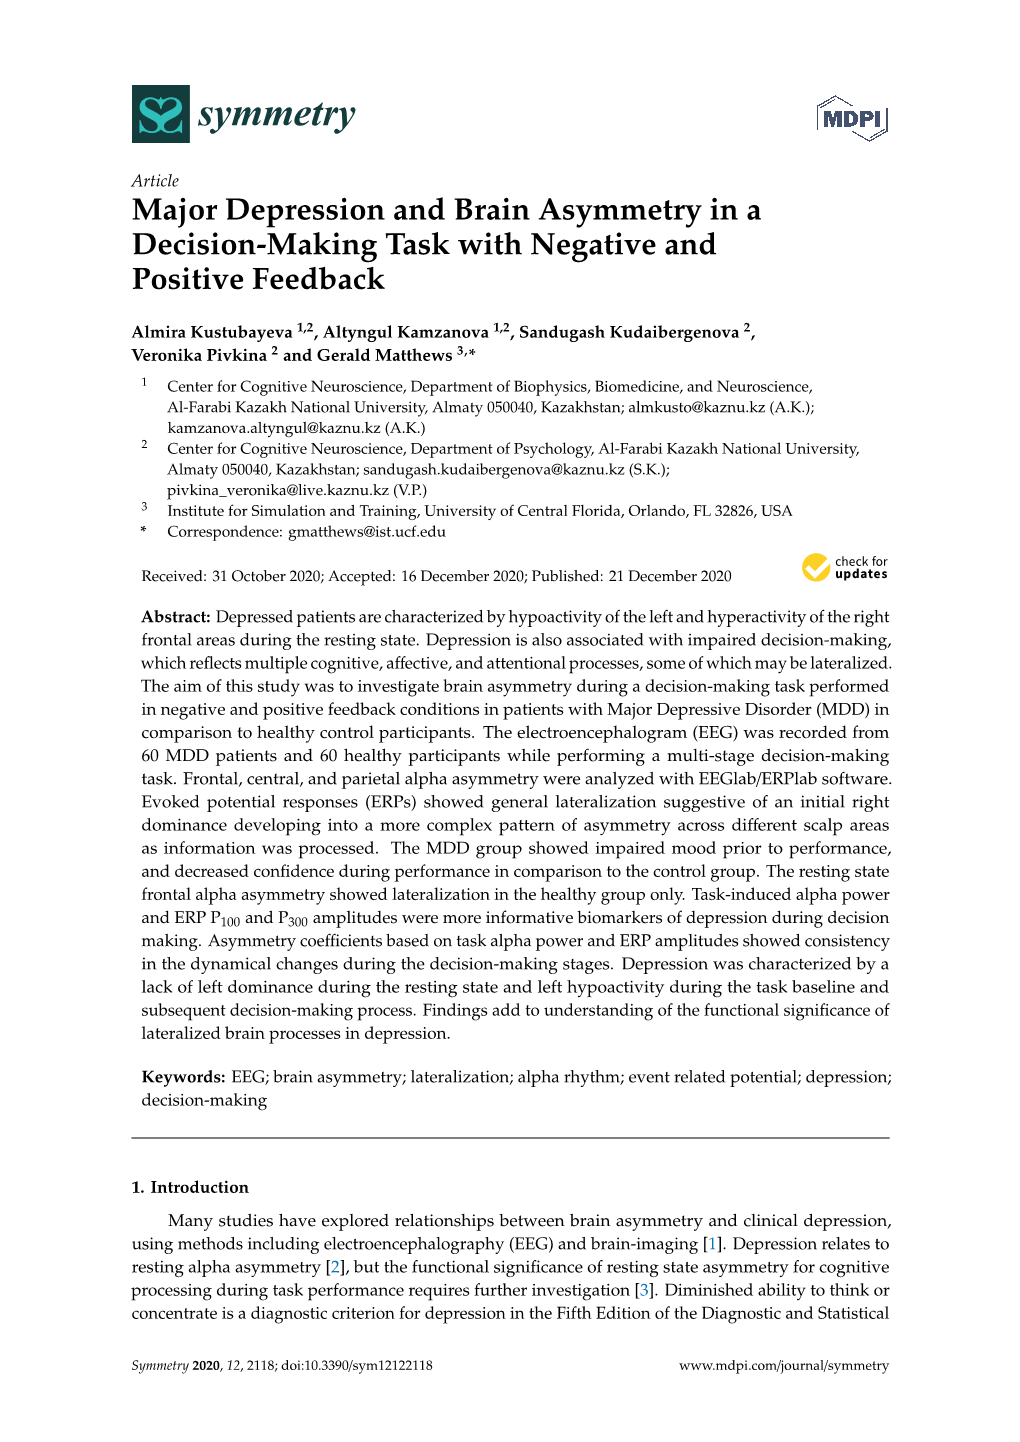 Major Depression and Brain Asymmetry in a Decision-Making Task with Negative and Positive Feedback